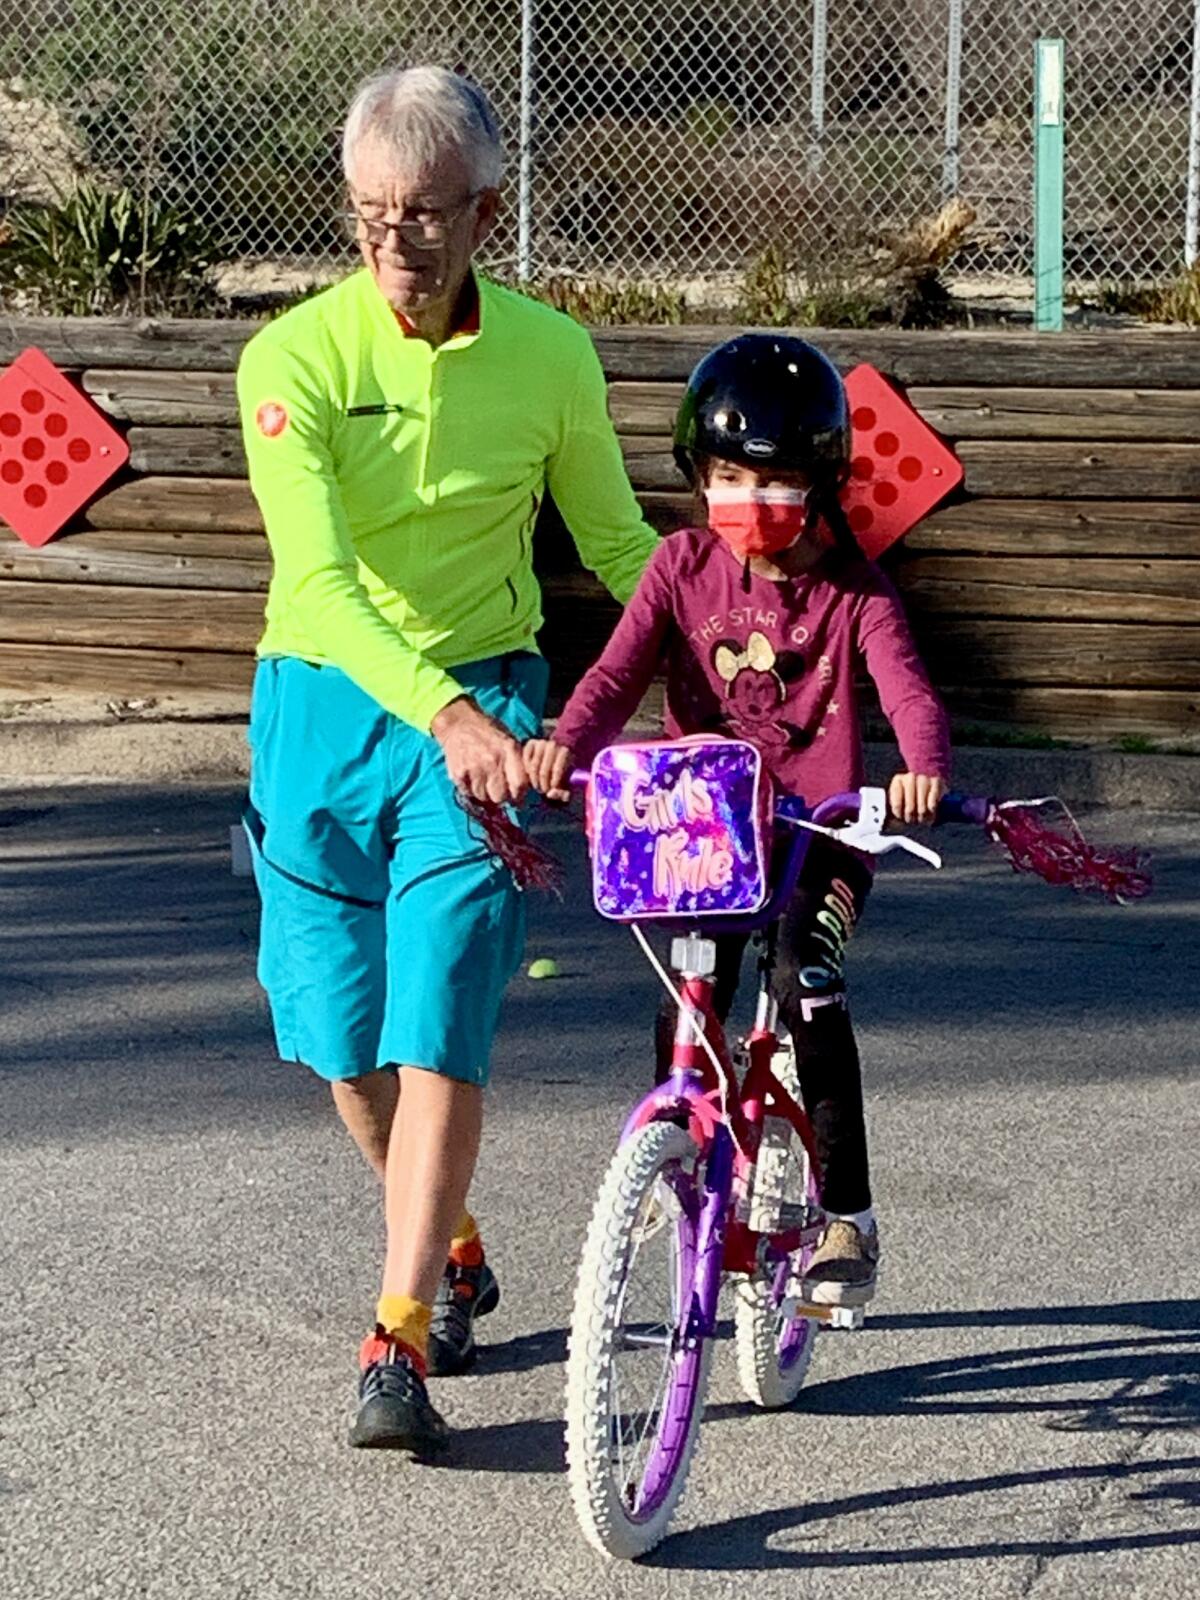 Karl Rudnick helps a student practice riding her new bike.